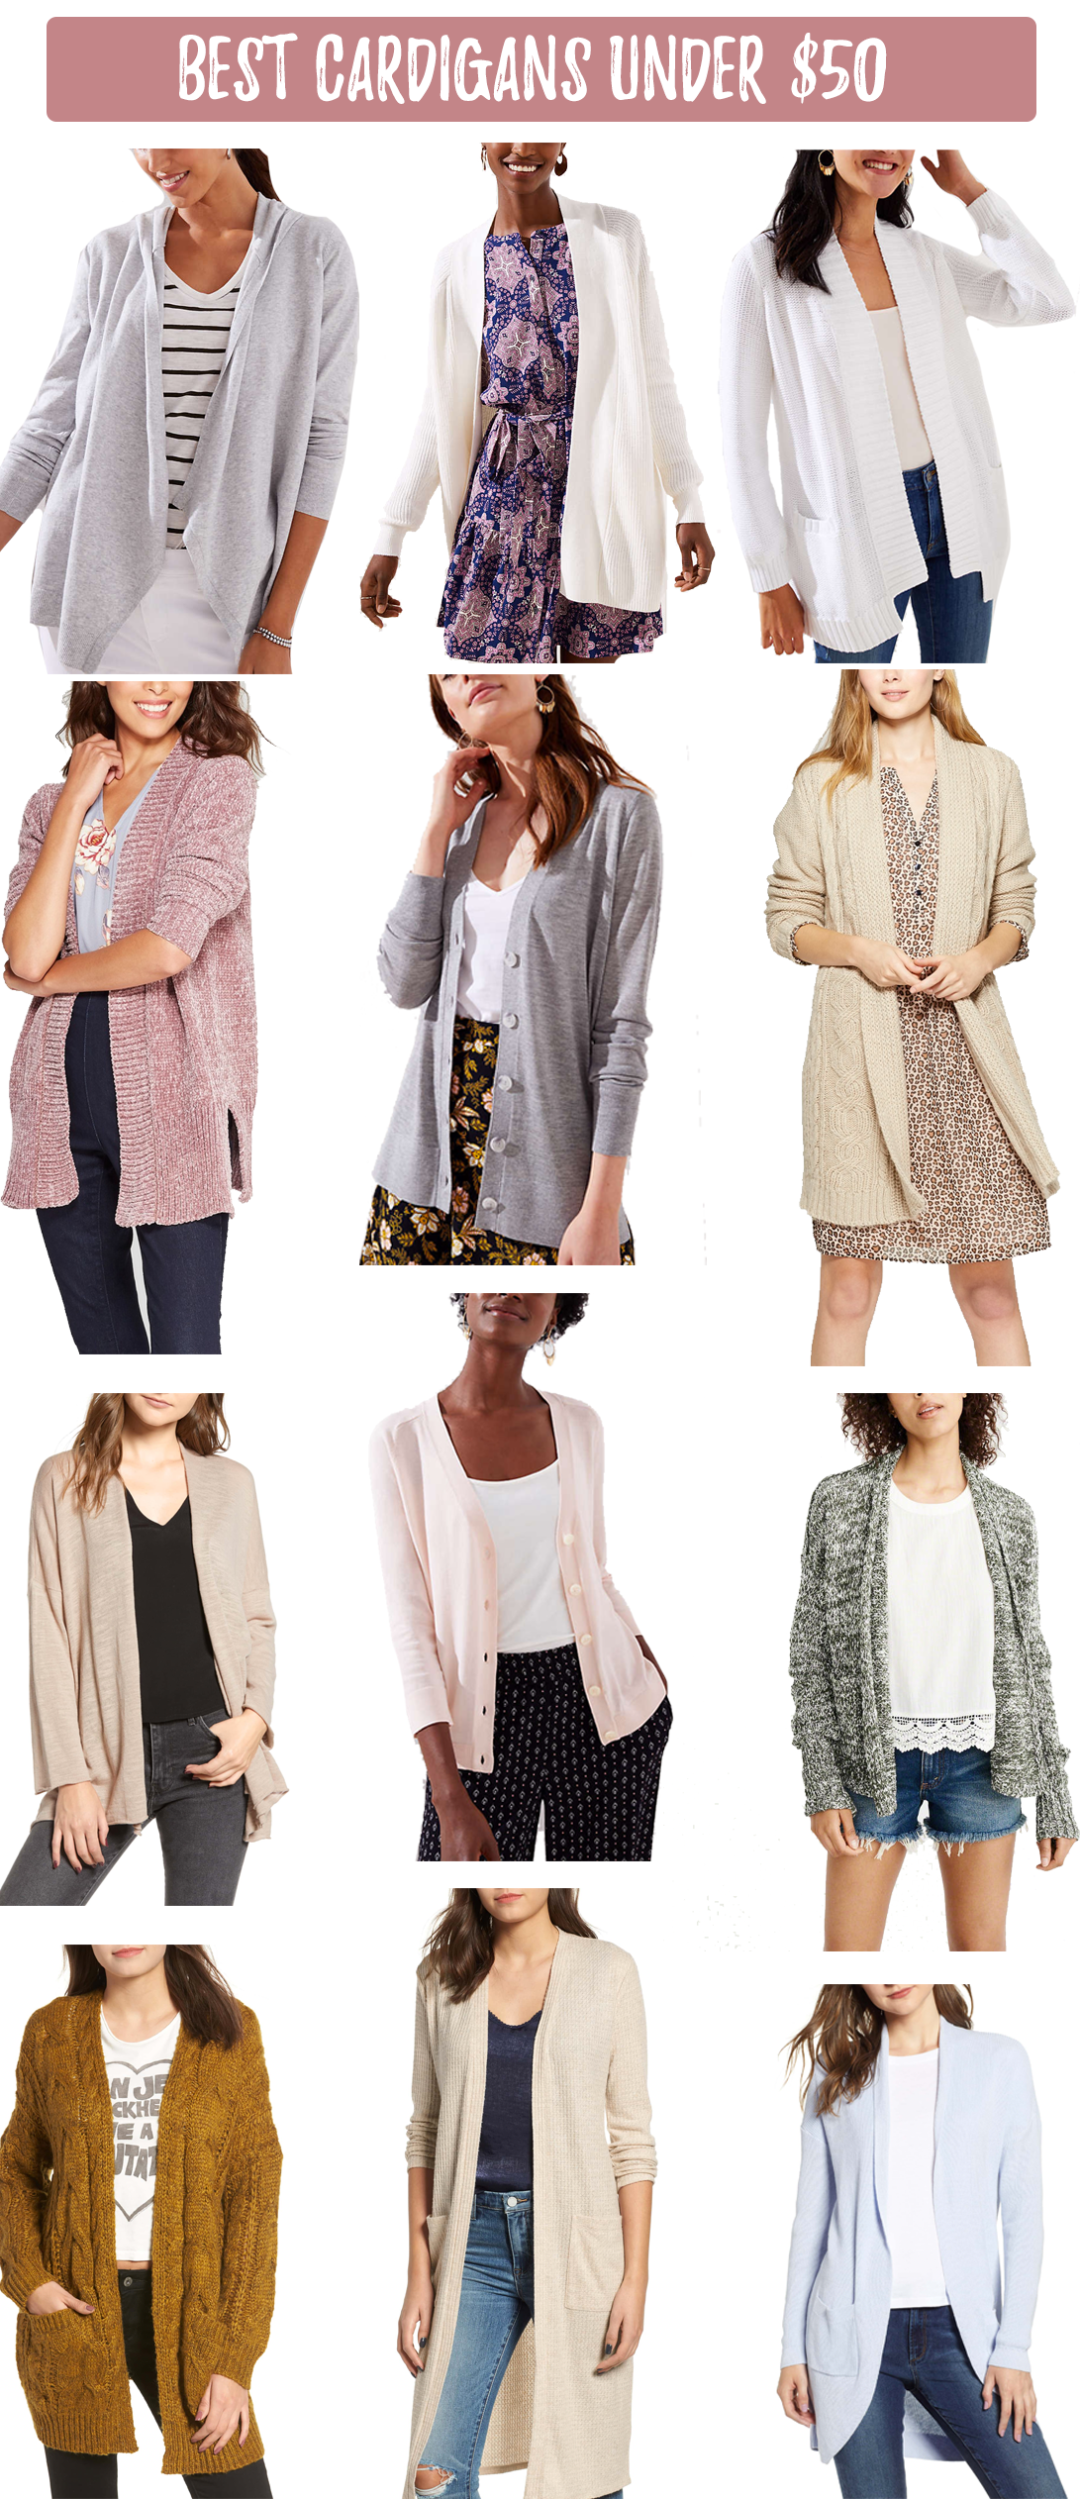 Fall's best cardigans under $50